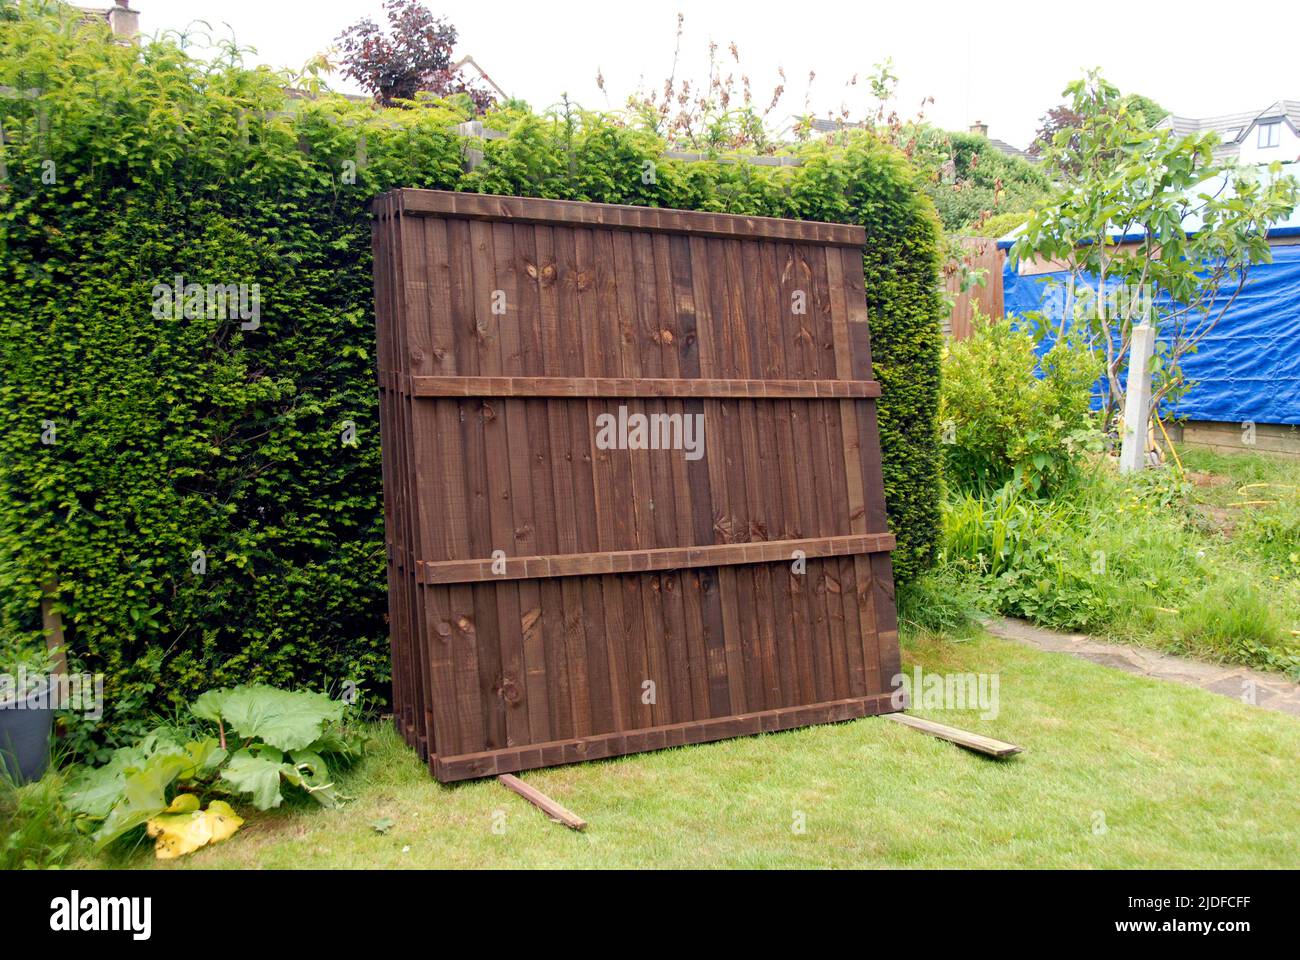 Fence panels standing on wooden supports on grass and leaning against Yew hedge temporarily until needed for installation Stock Photo